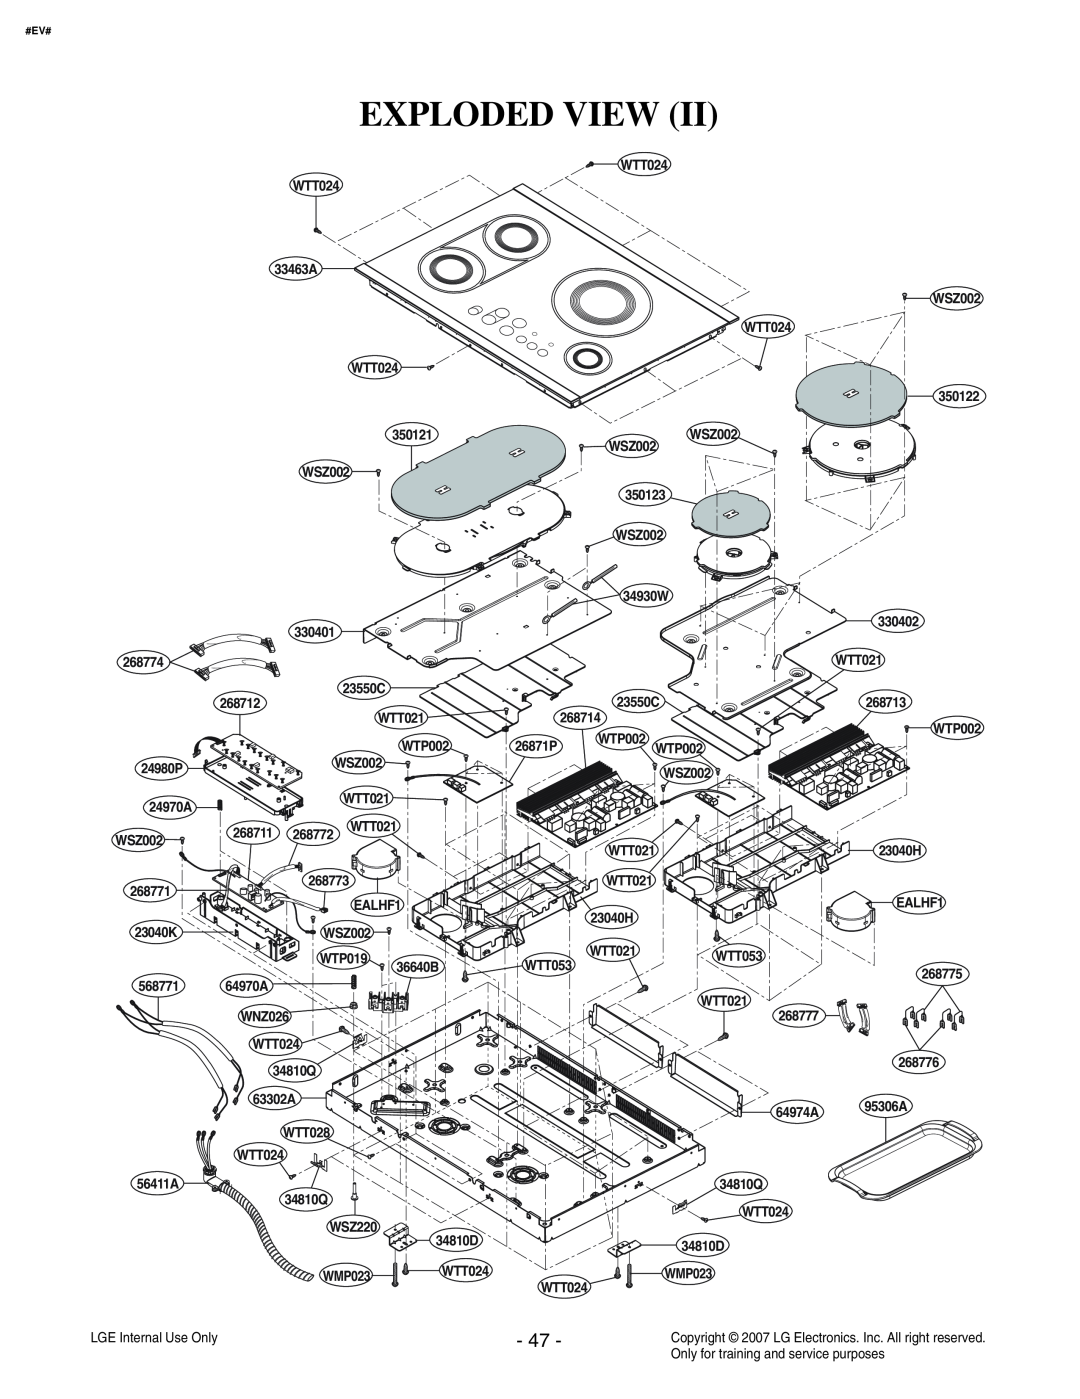 LG Electronics LCE30845 service manual Exploded View, 350121, WSZ002, 330401, 268712, 26871P, WTP002, 268772, WTT024 